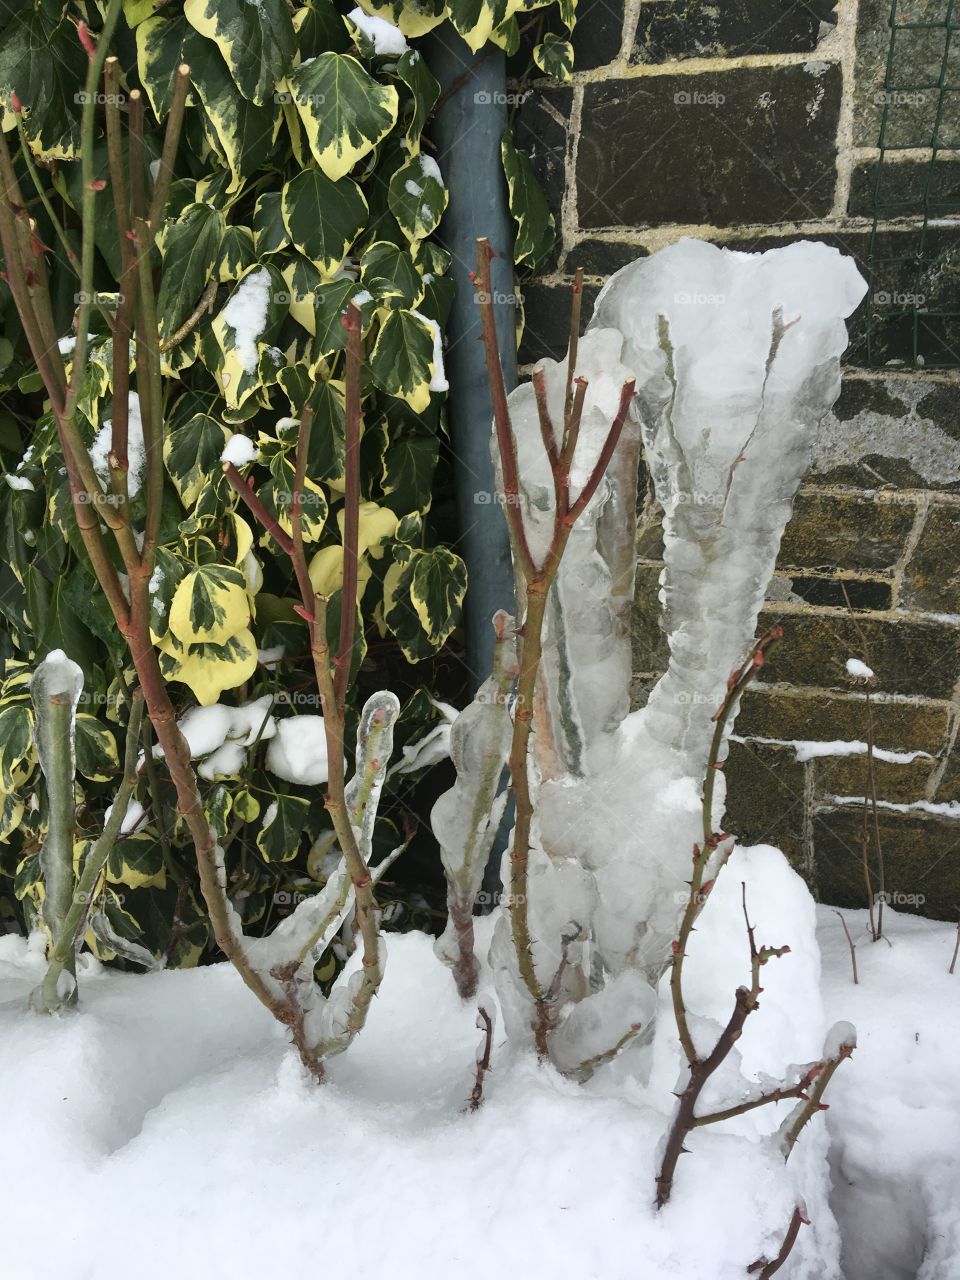 A frozen rose, hibernating for through the cold winter. 